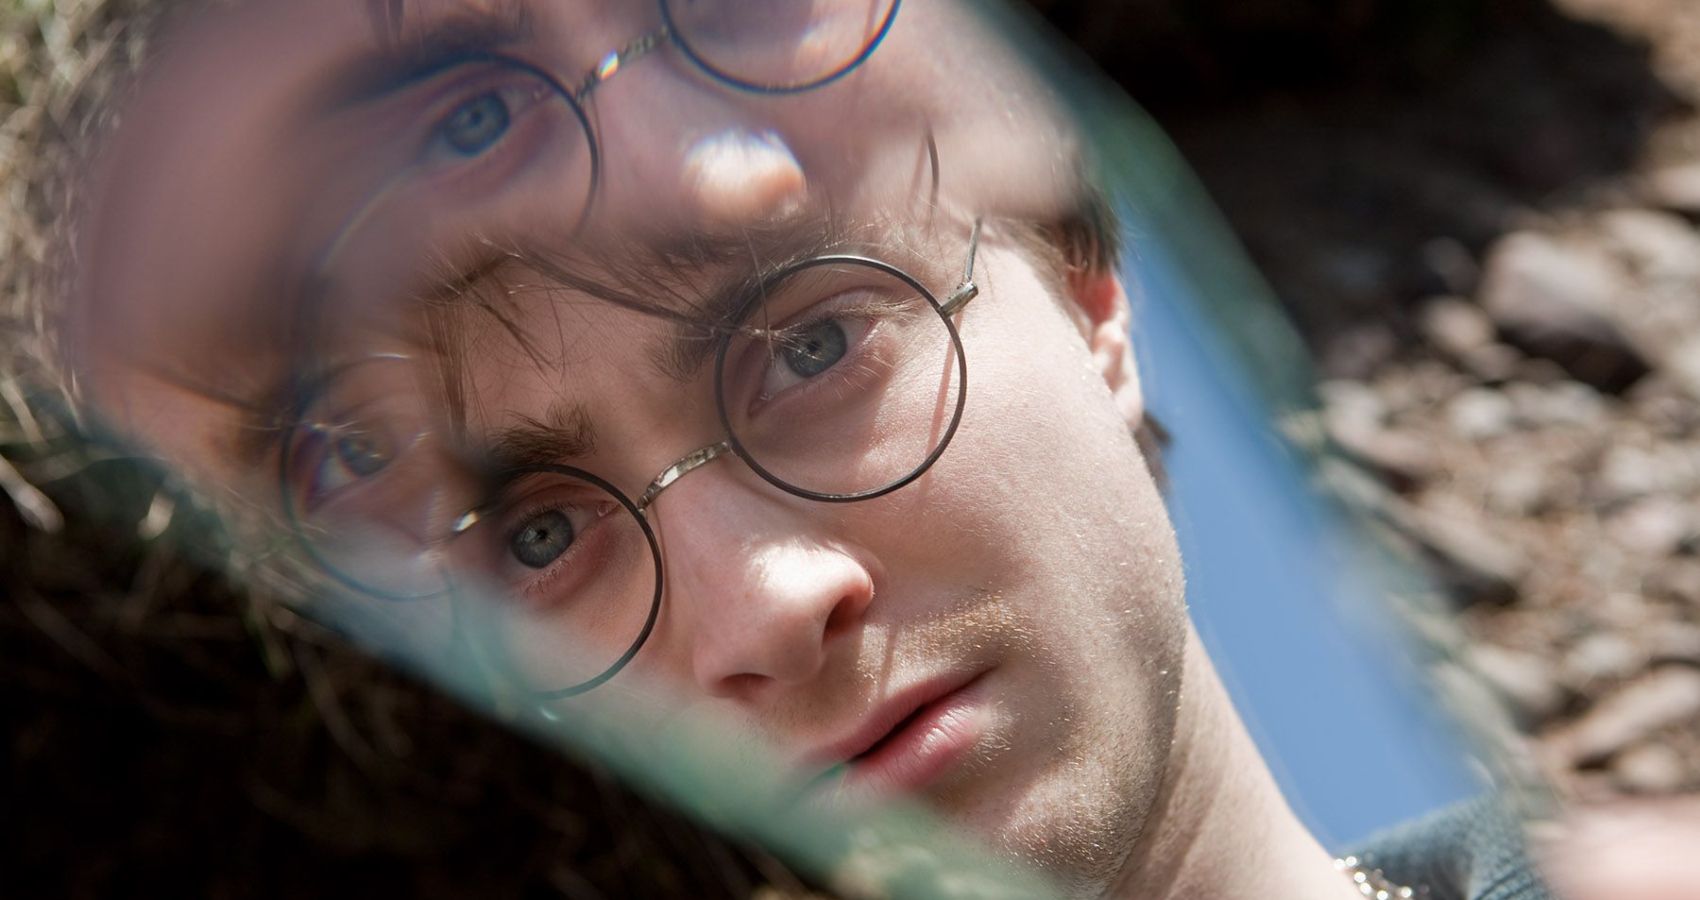 Latest Harry Potter 7 Images Featuring Harry, Ron, and Hermione(1)